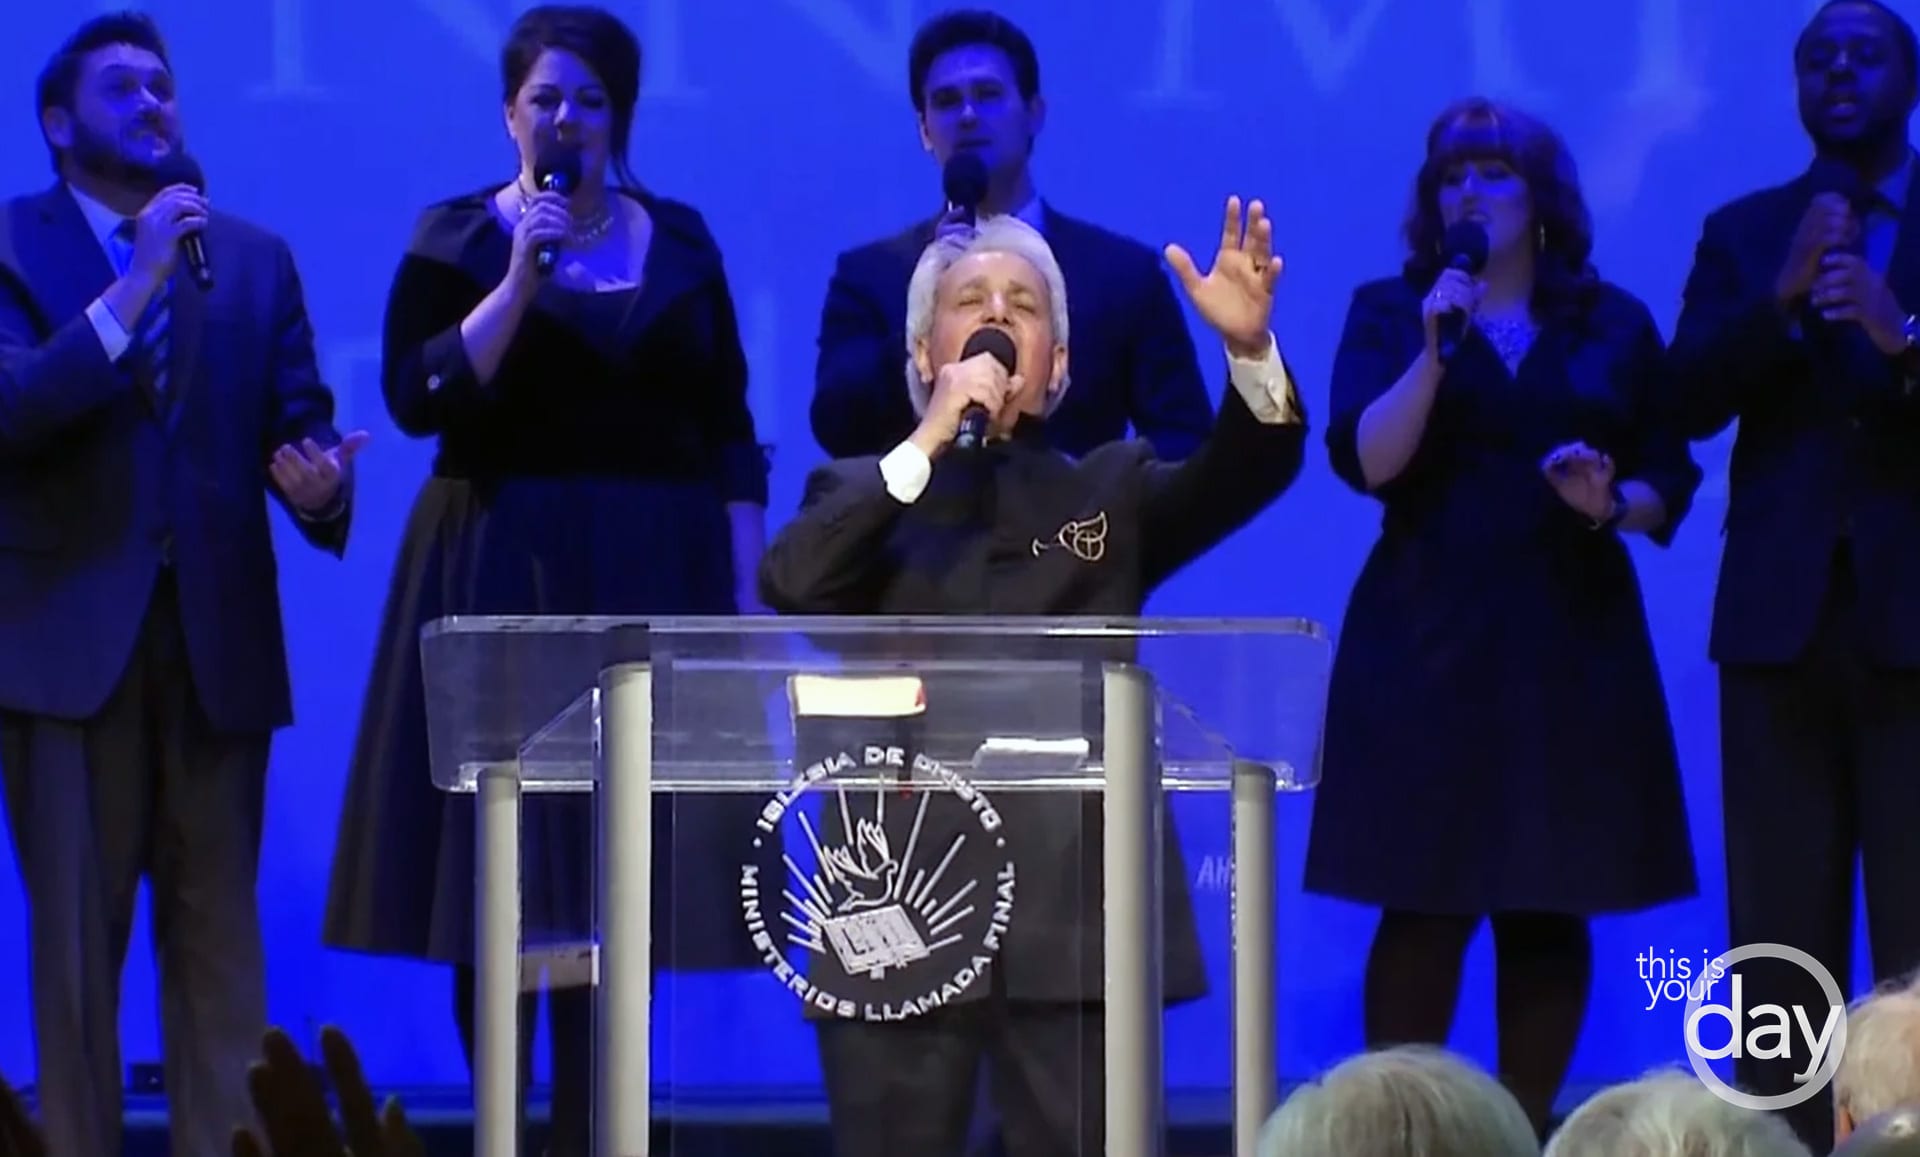 Entering the Healing Presence of God - This Is Your Day - Benny Hinn Ministries